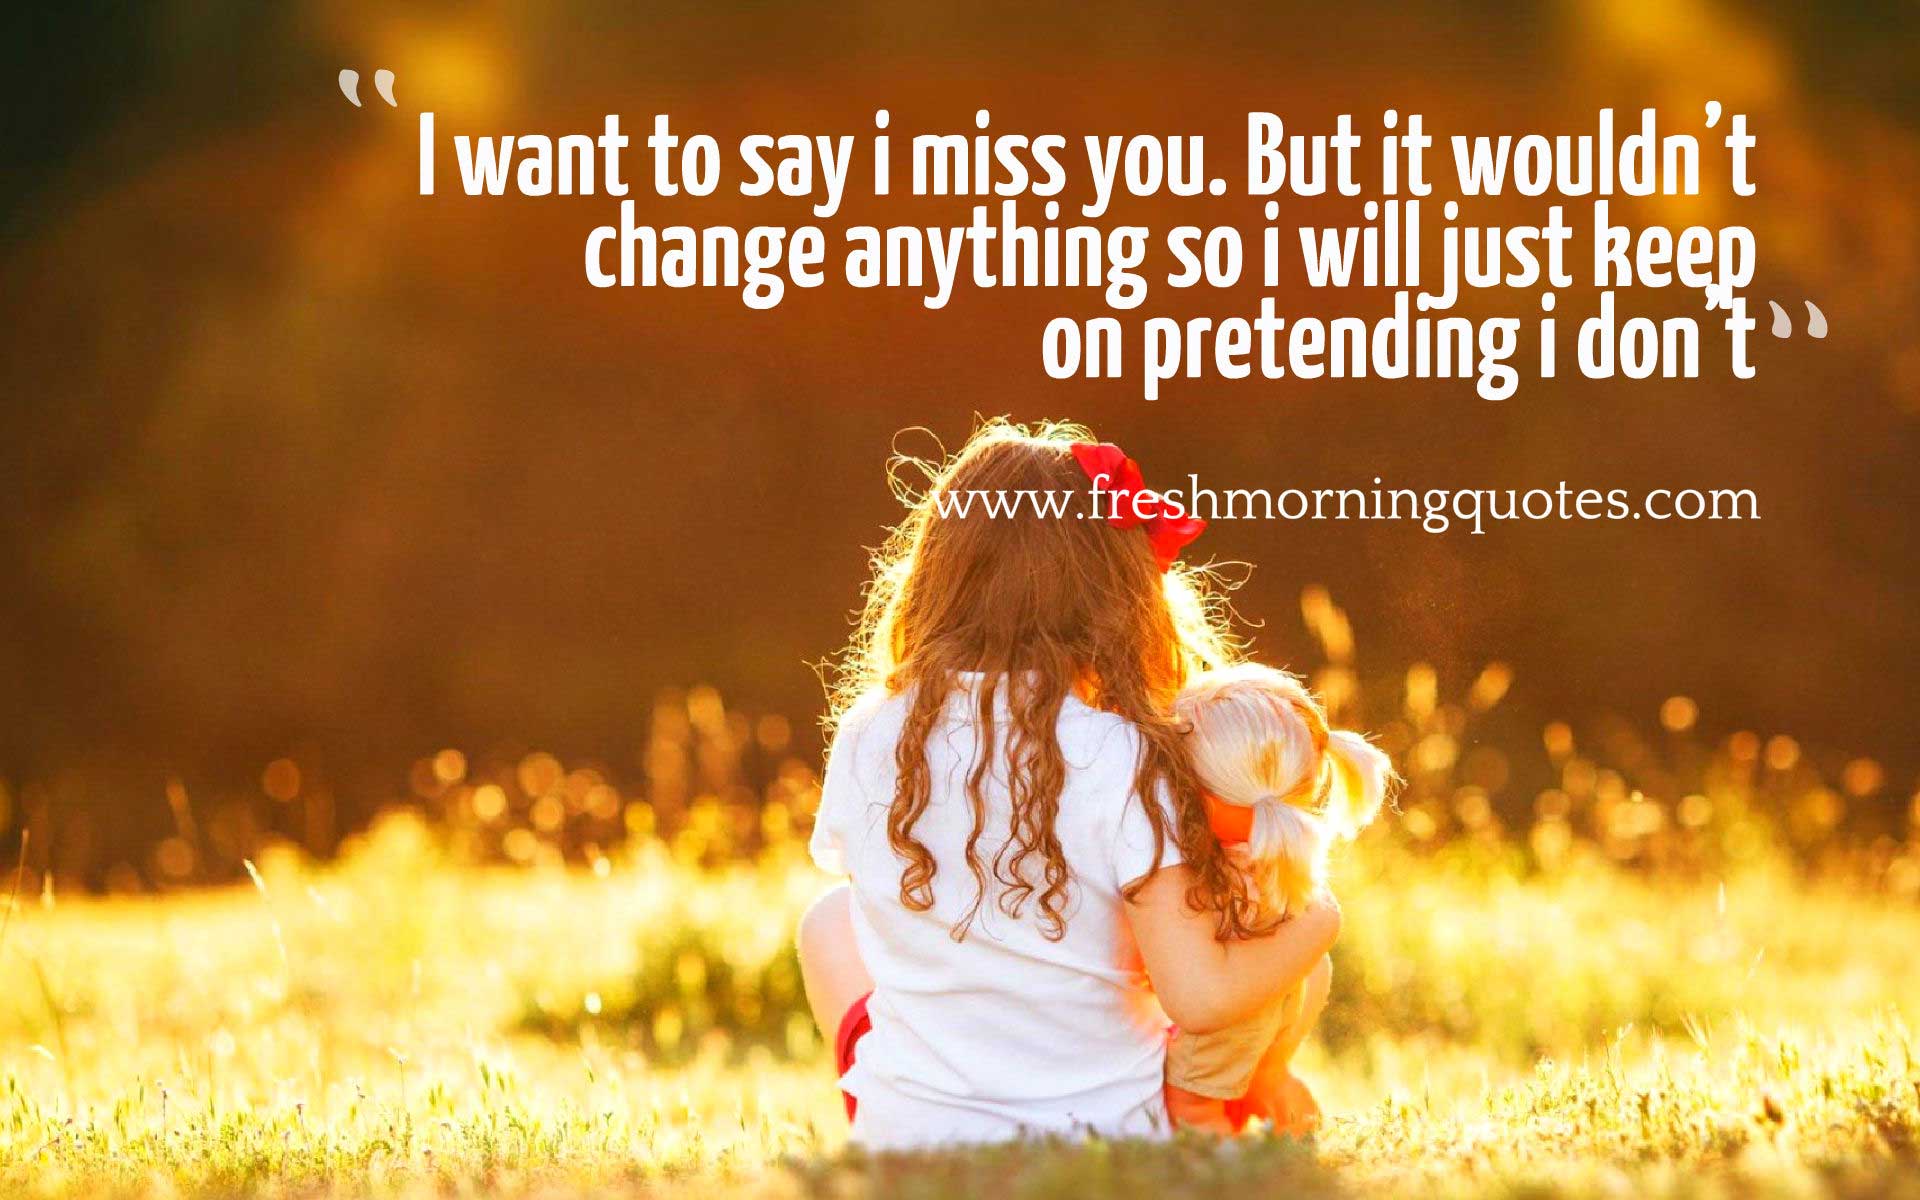 40+ Beautiful Missing You Quotes for your Love - Freshmorningquotes